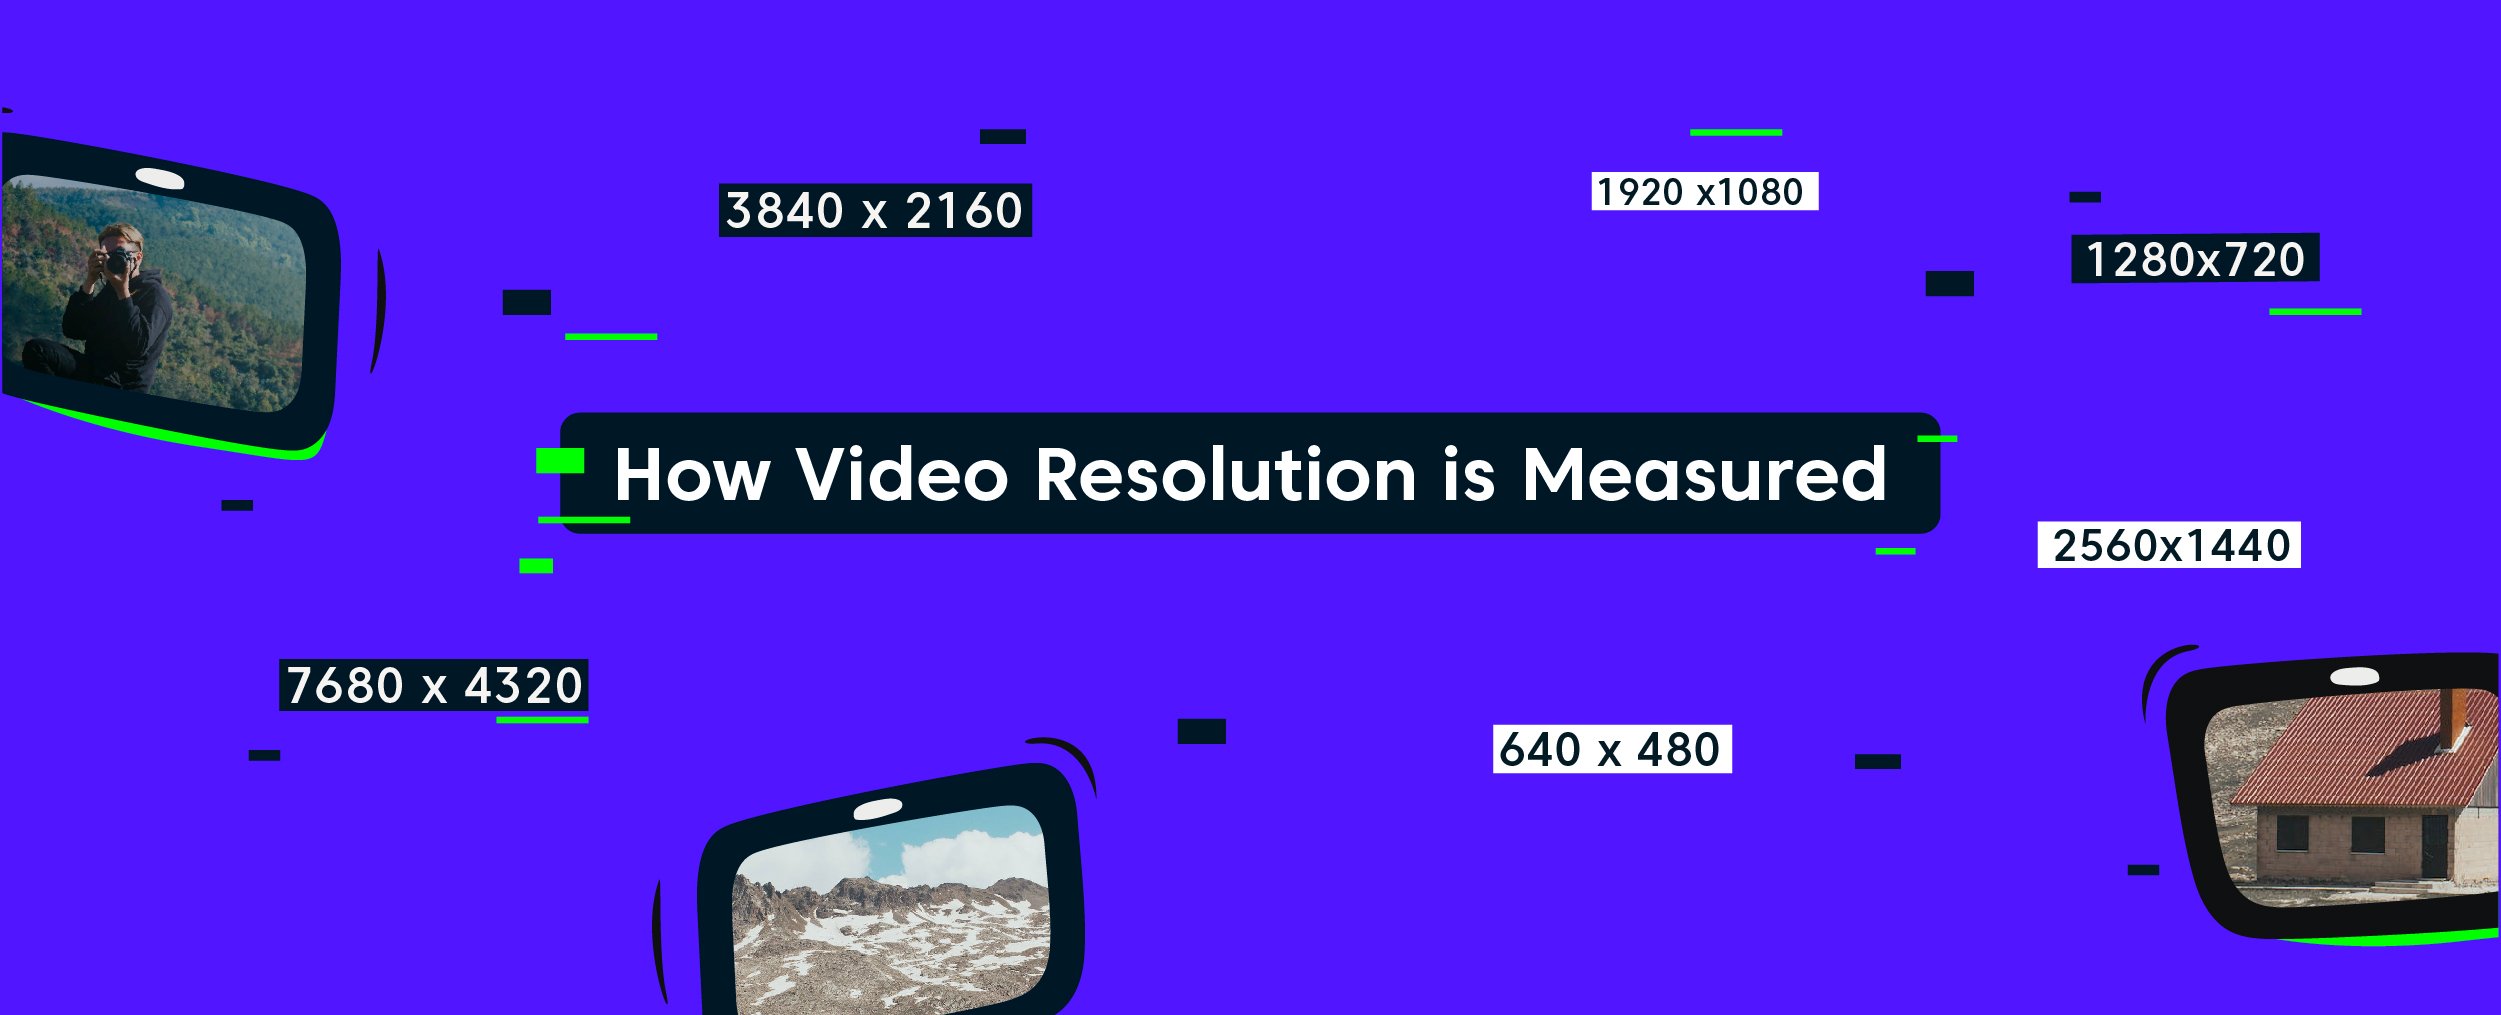 How Video Resolution is Measured